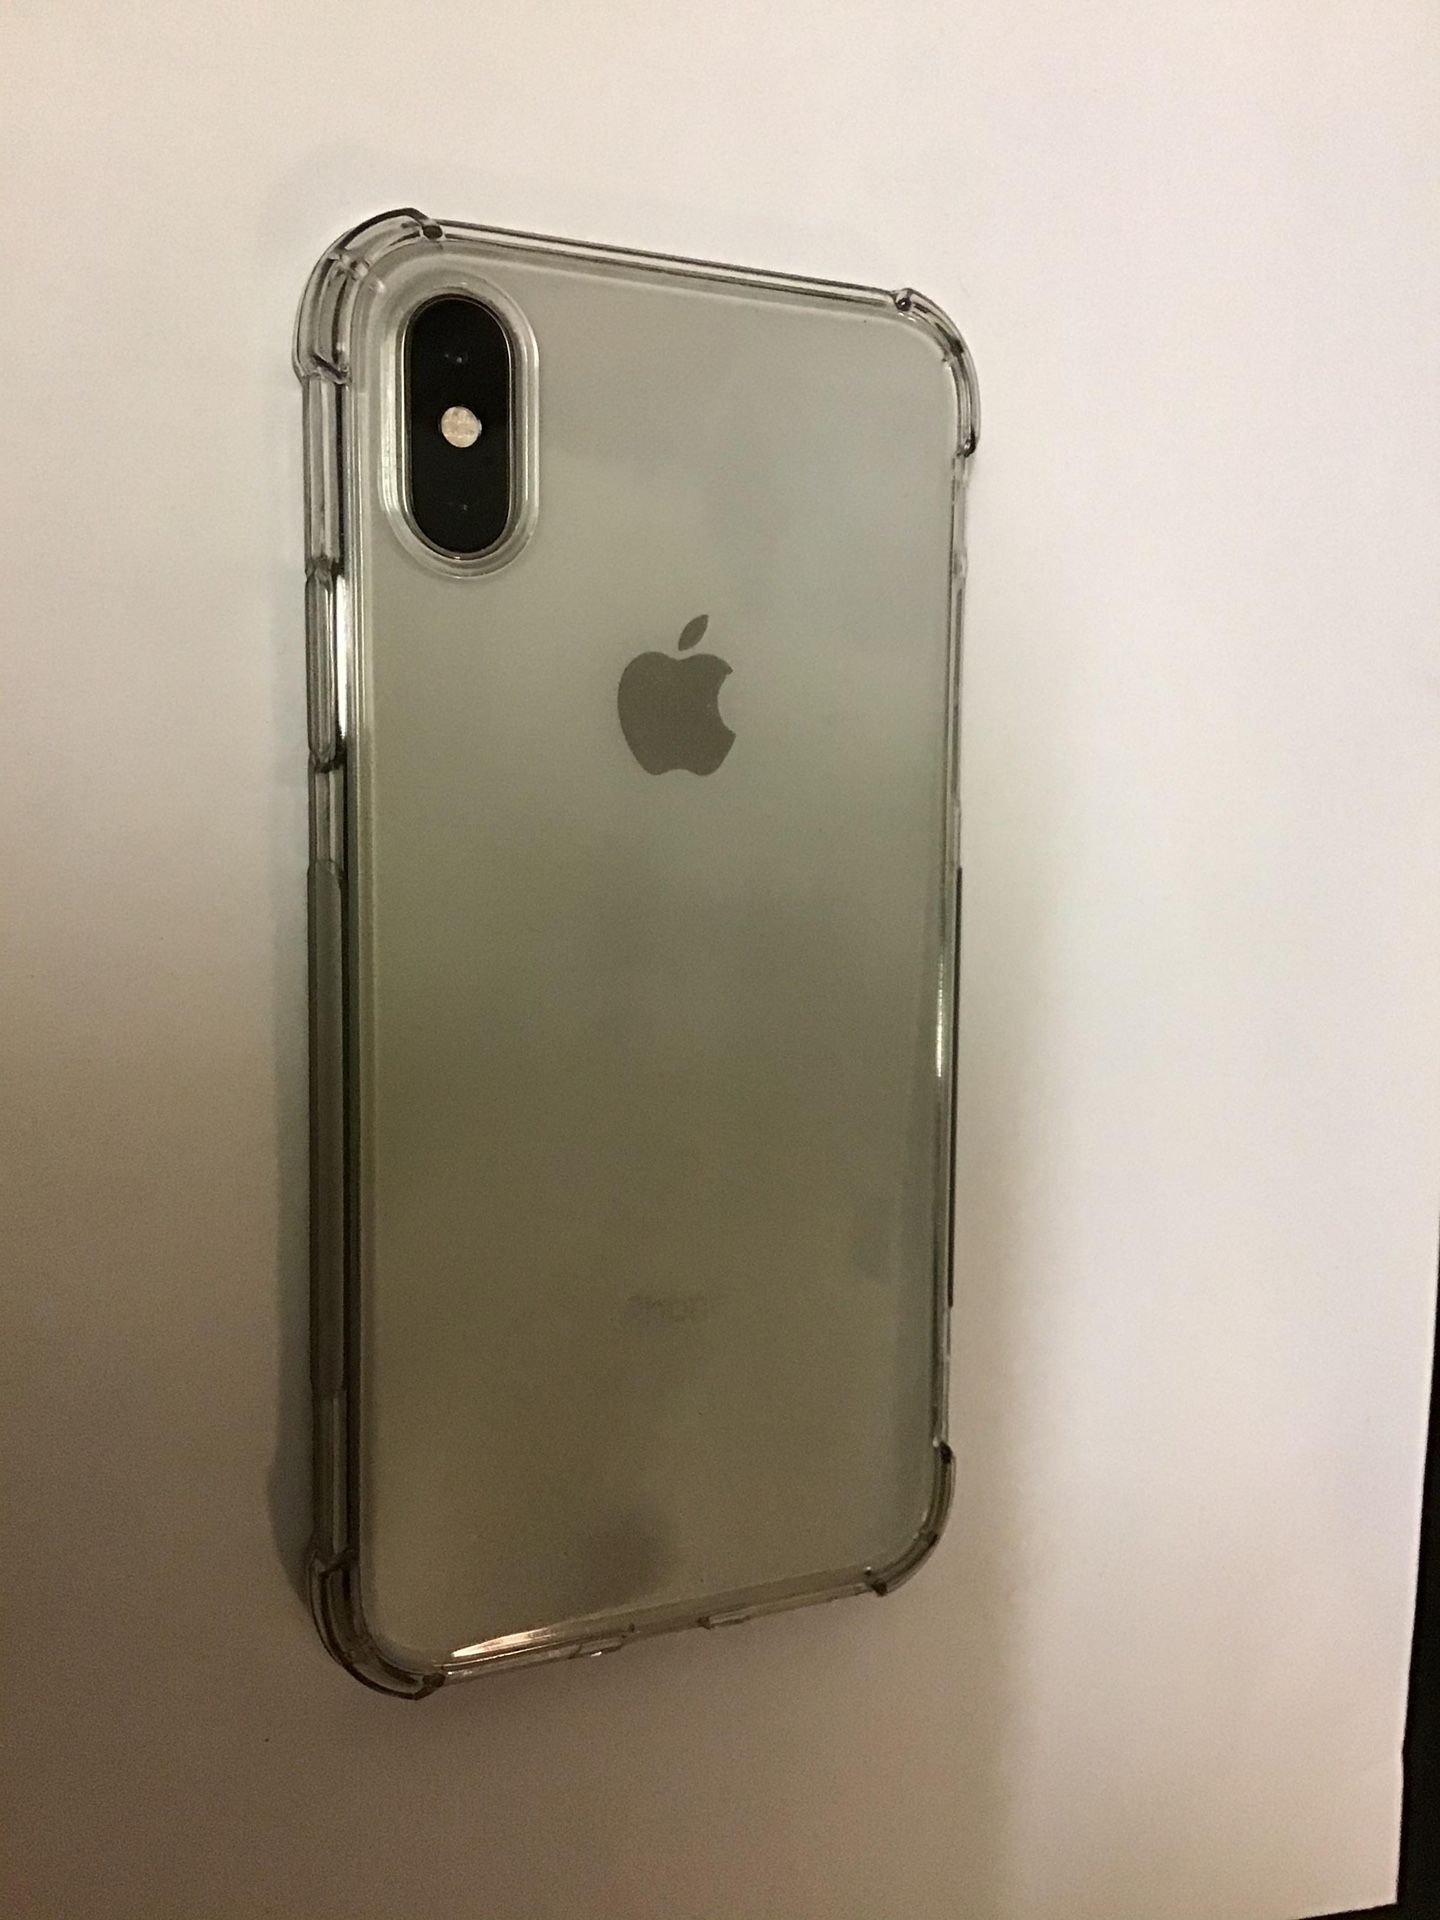 iPhone XS 64gig “like new” just relaced